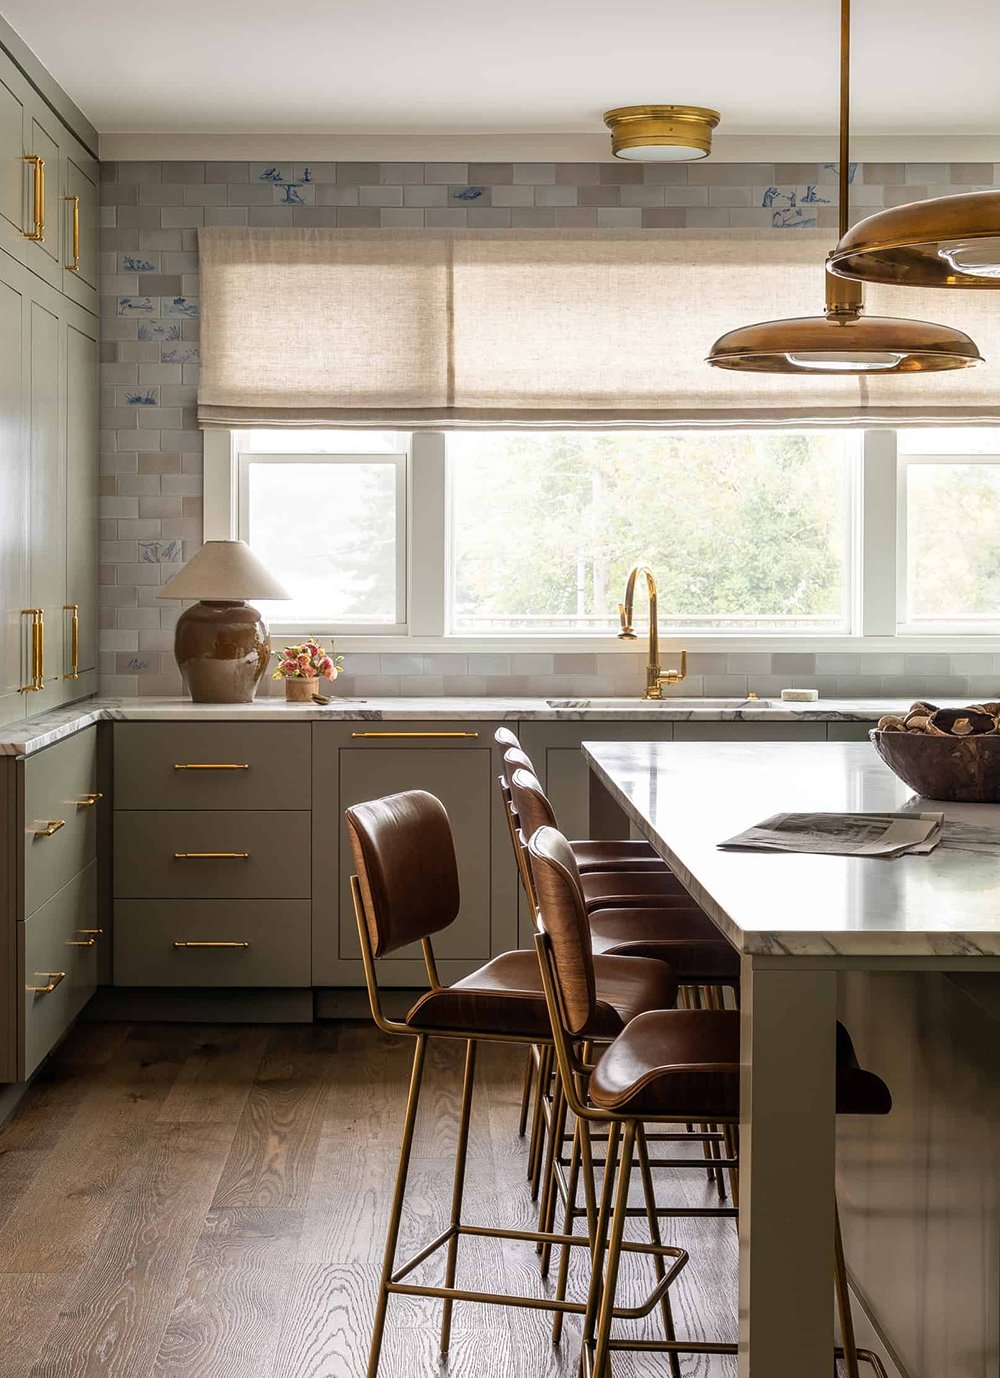 Roundup : Kitchen Countertop Lamps - roomfortuesday.com